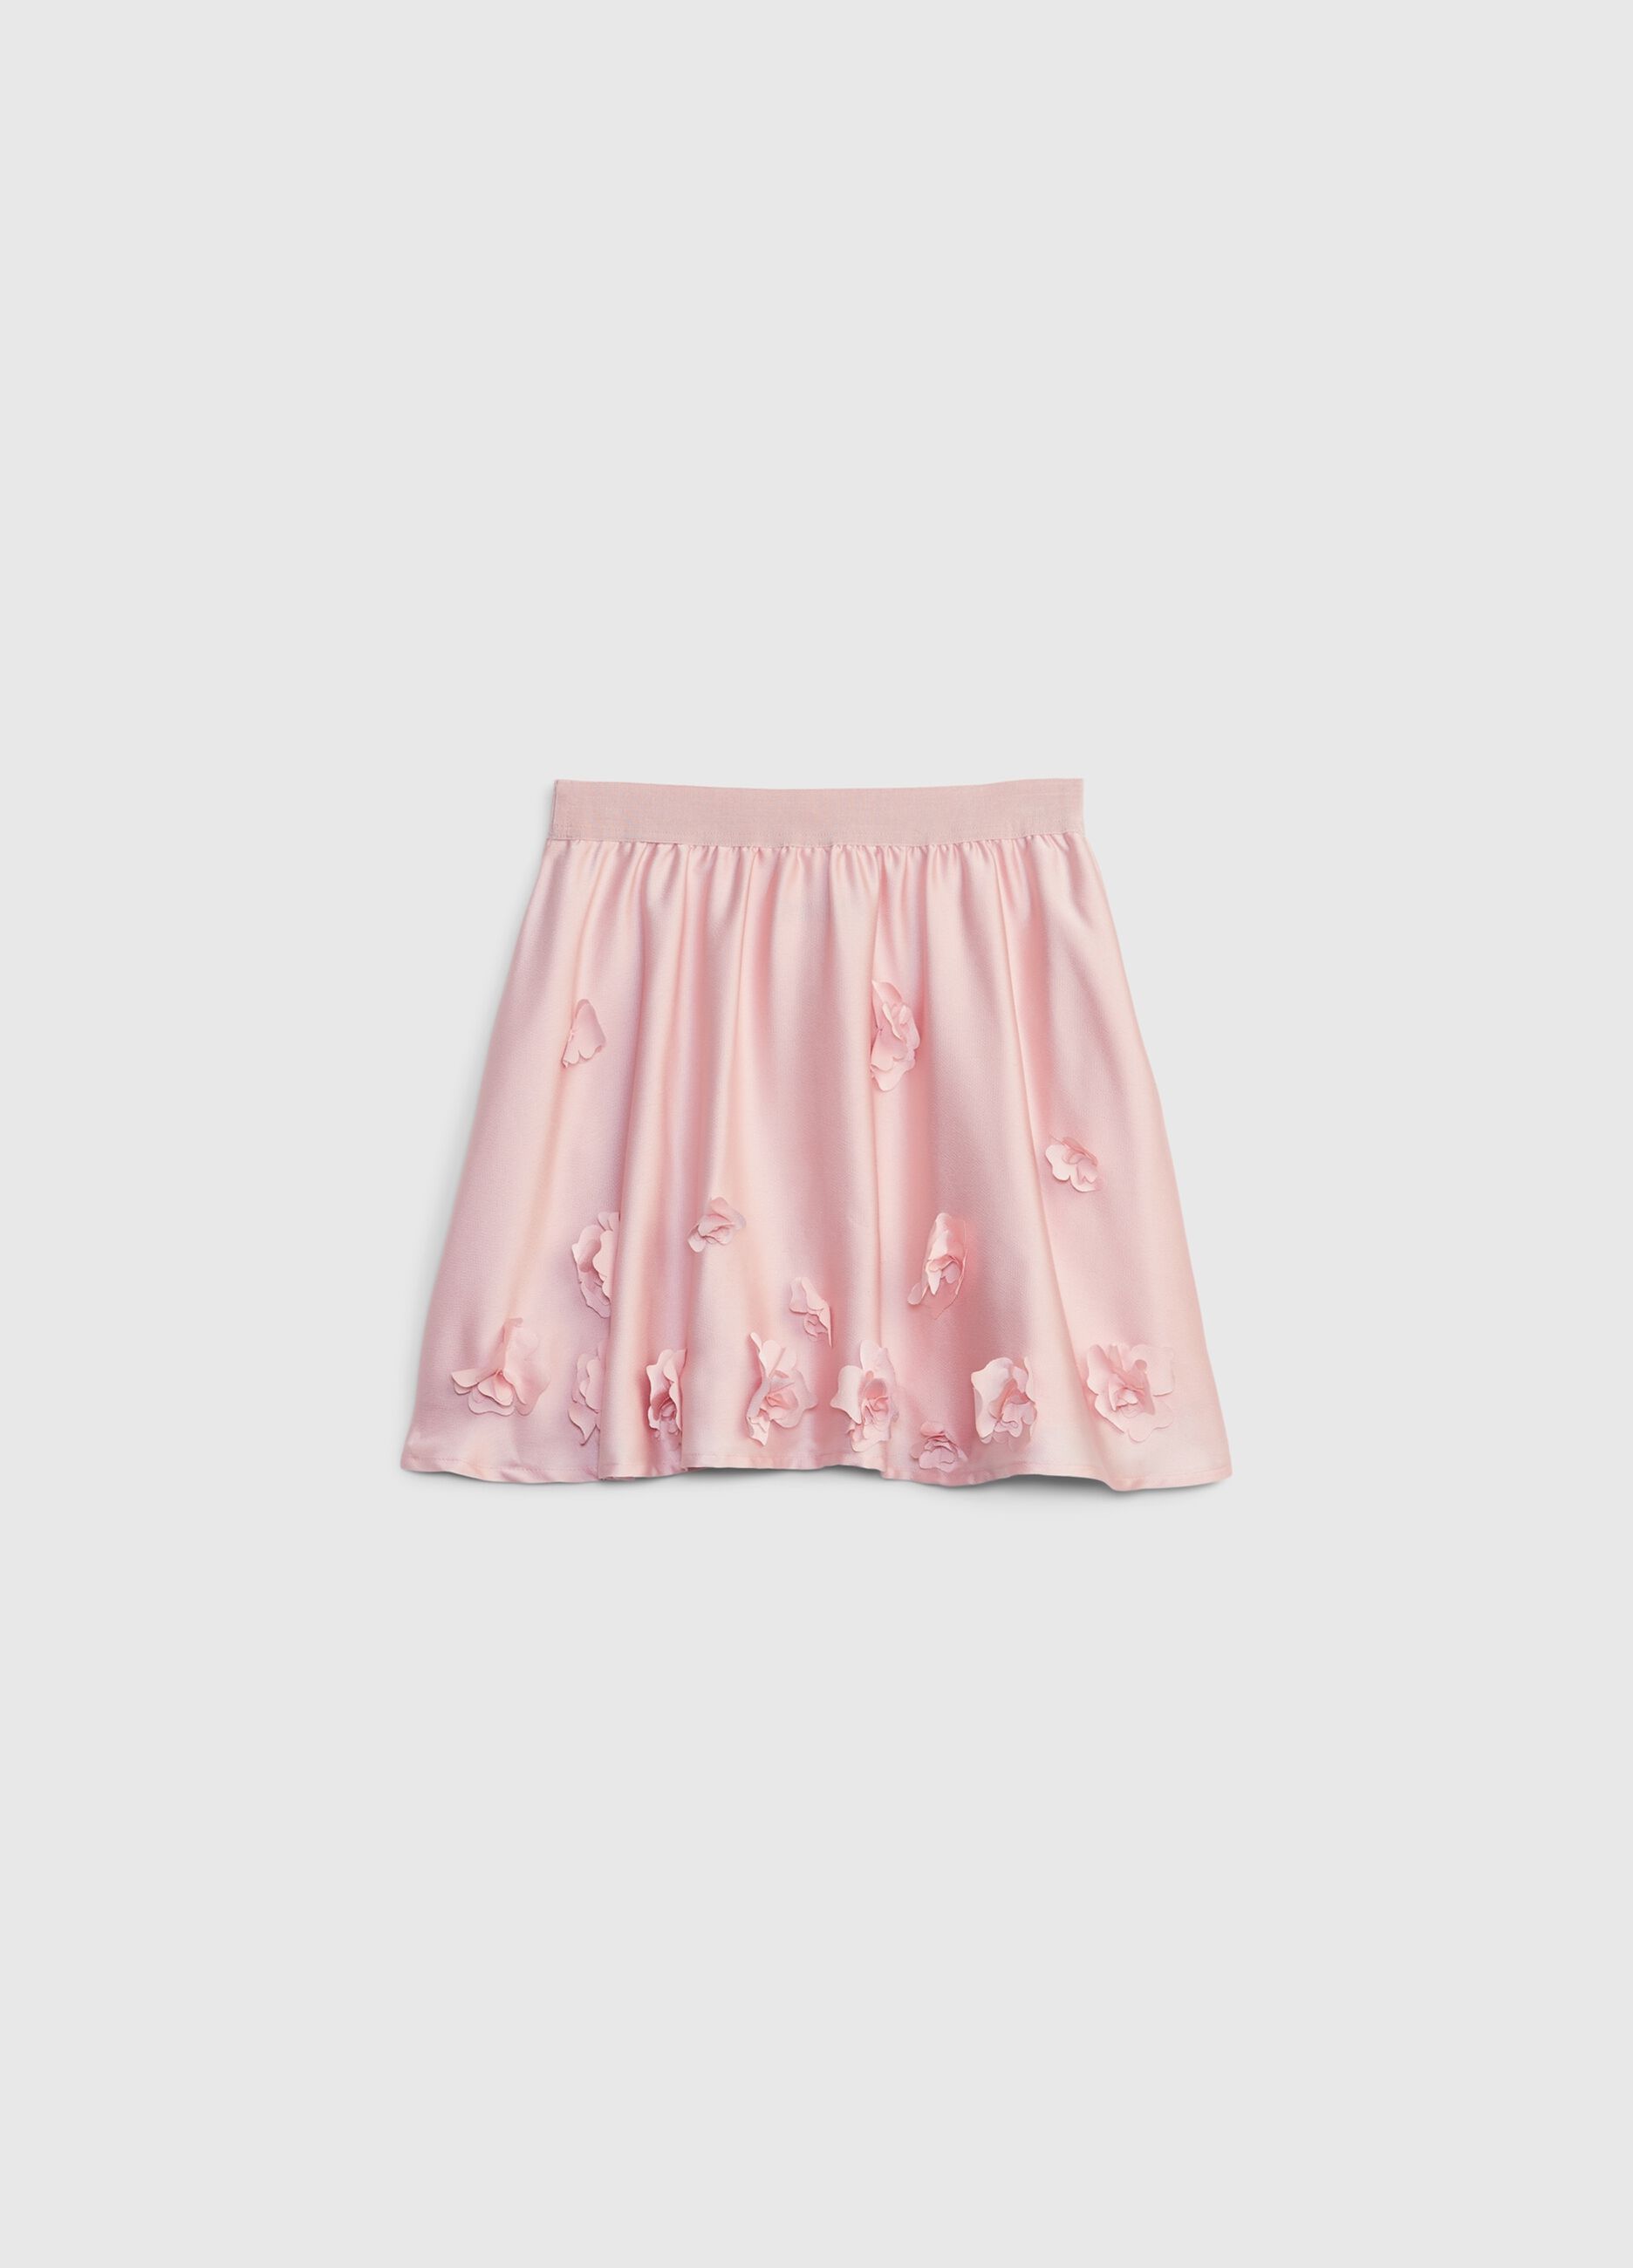 Short skirt in satin with flowers